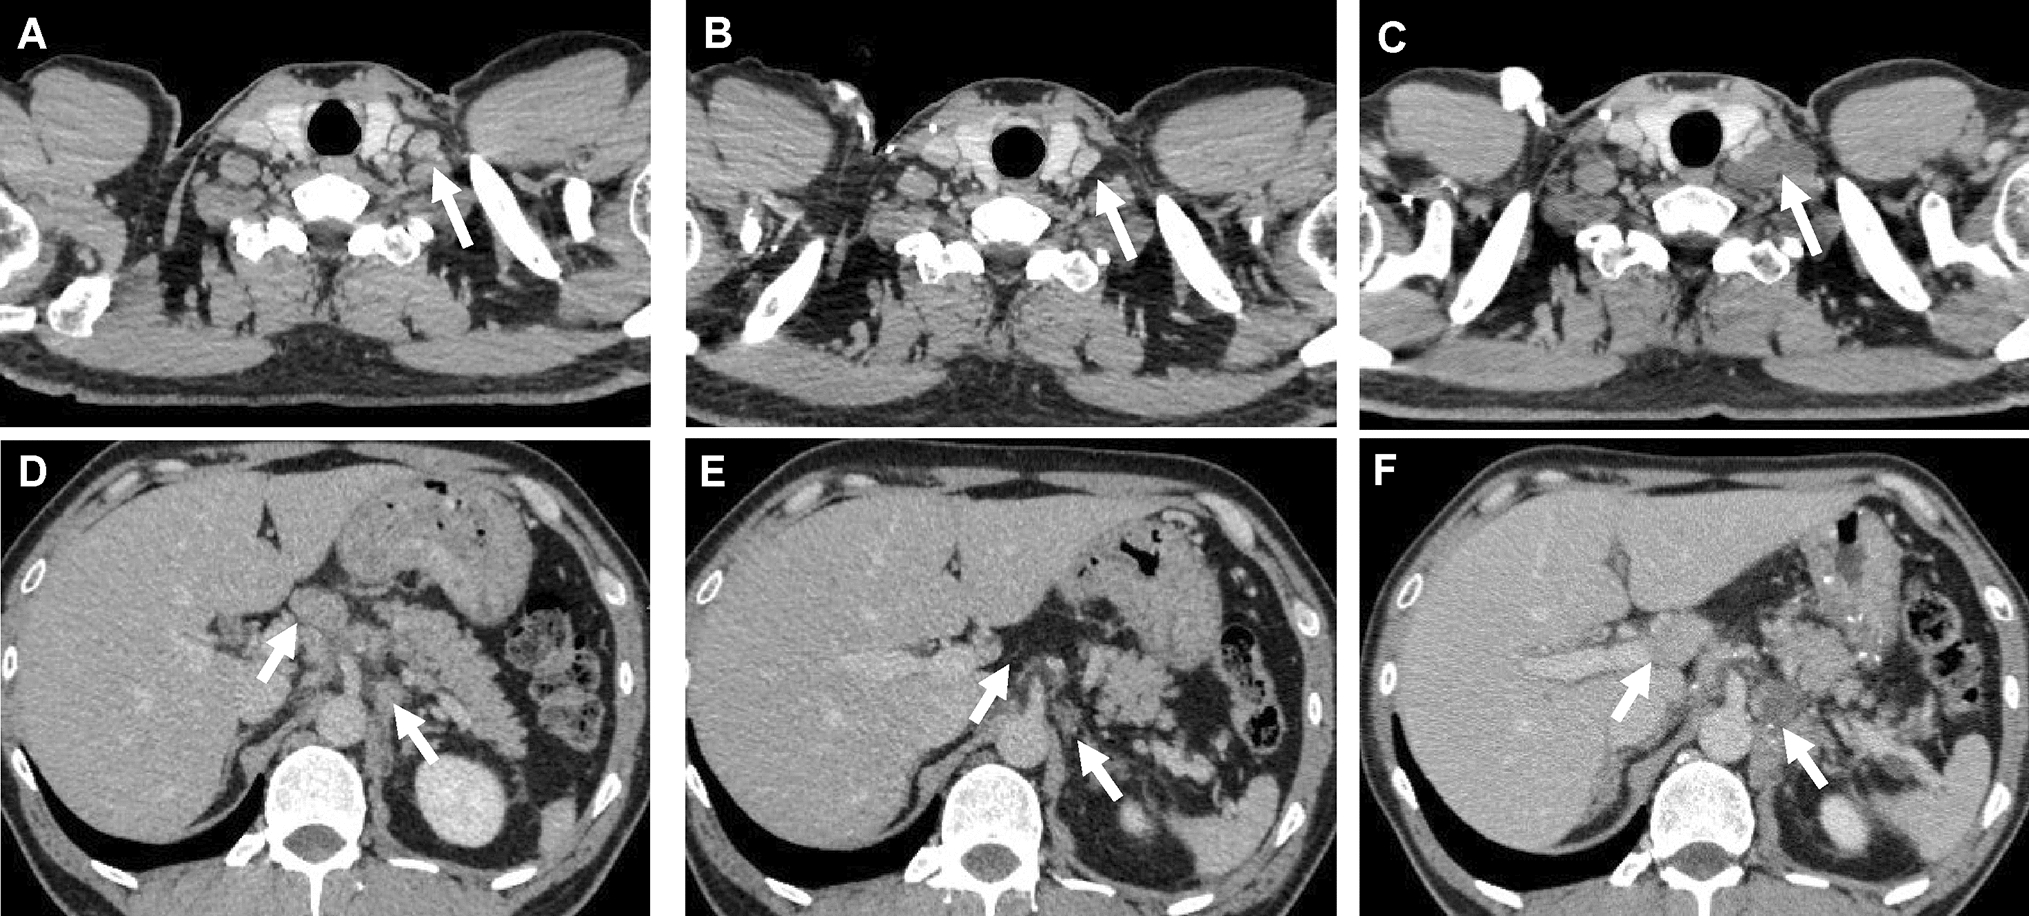 A case of treatment-resistant advanced gastric cancer with FGFR2 gene alteration successfully treated with pemigatinib